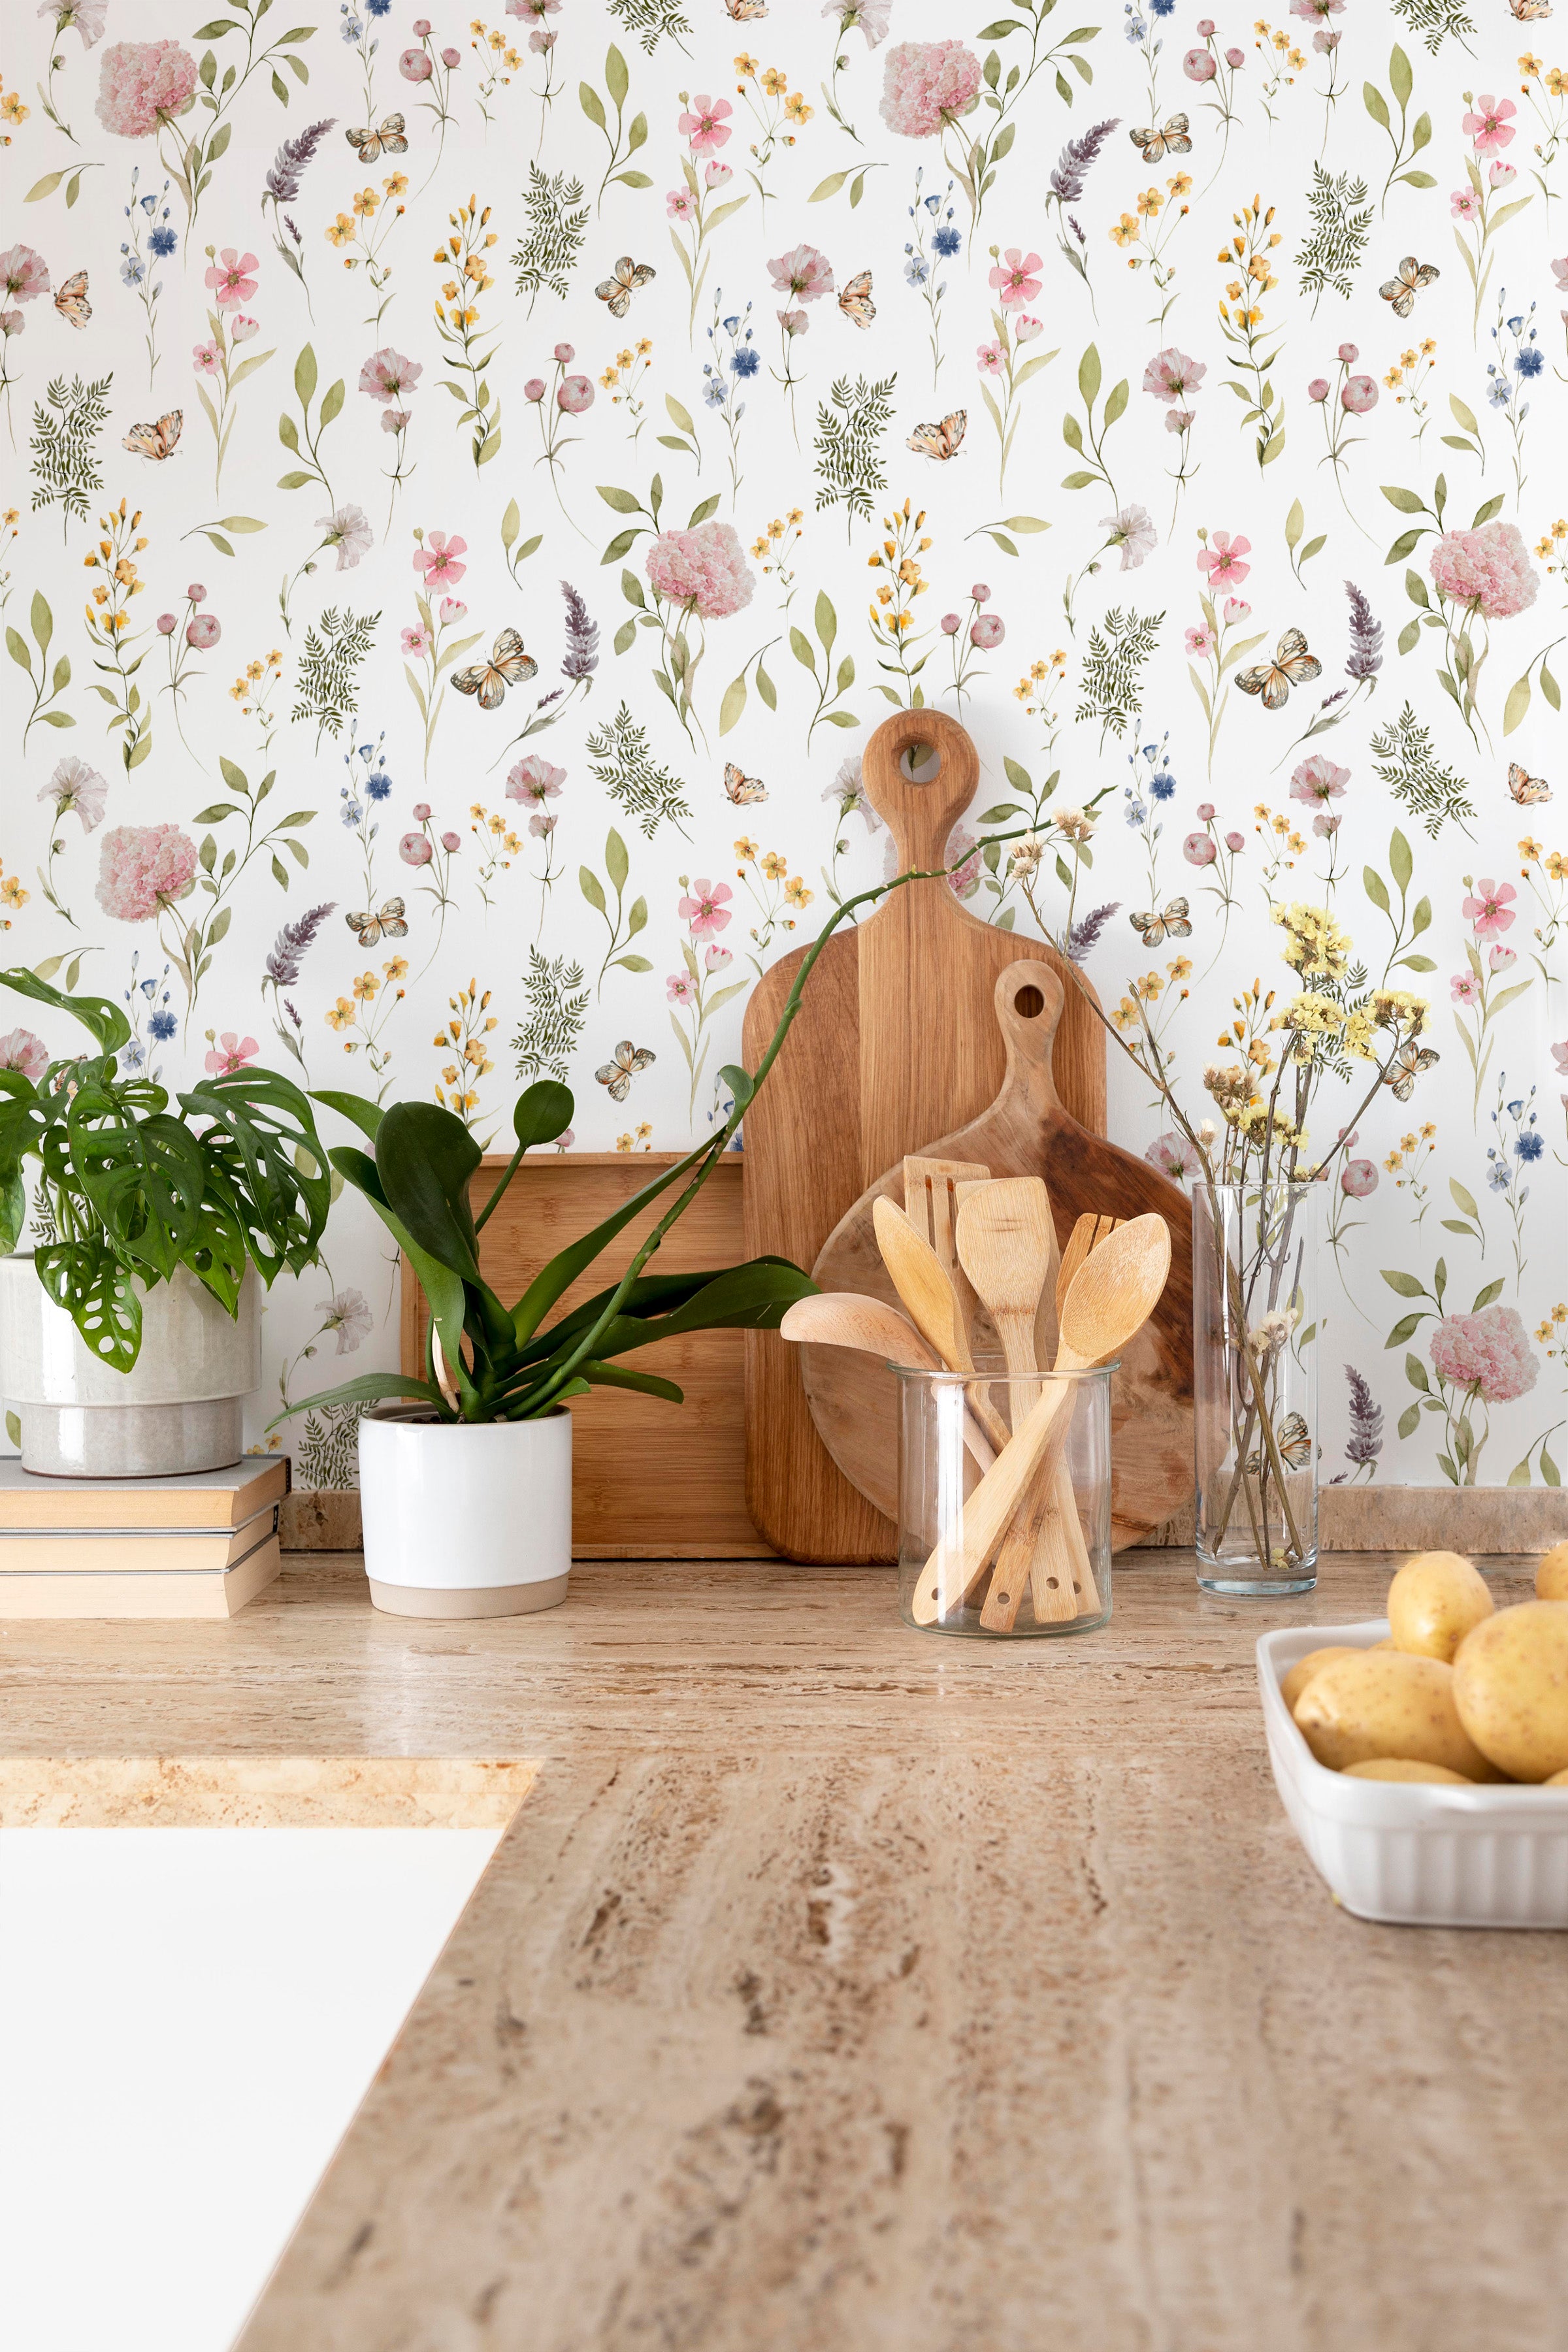 A well-lit kitchen corner showcases the Floral Fields Wallpaper as a backdrop, enhancing the space with its soft floral print. Wooden kitchen accessories, fresh plants, and a clear vase of dried flowers sit atop a countertop, harmonizing with the wallpaper's botanical theme.